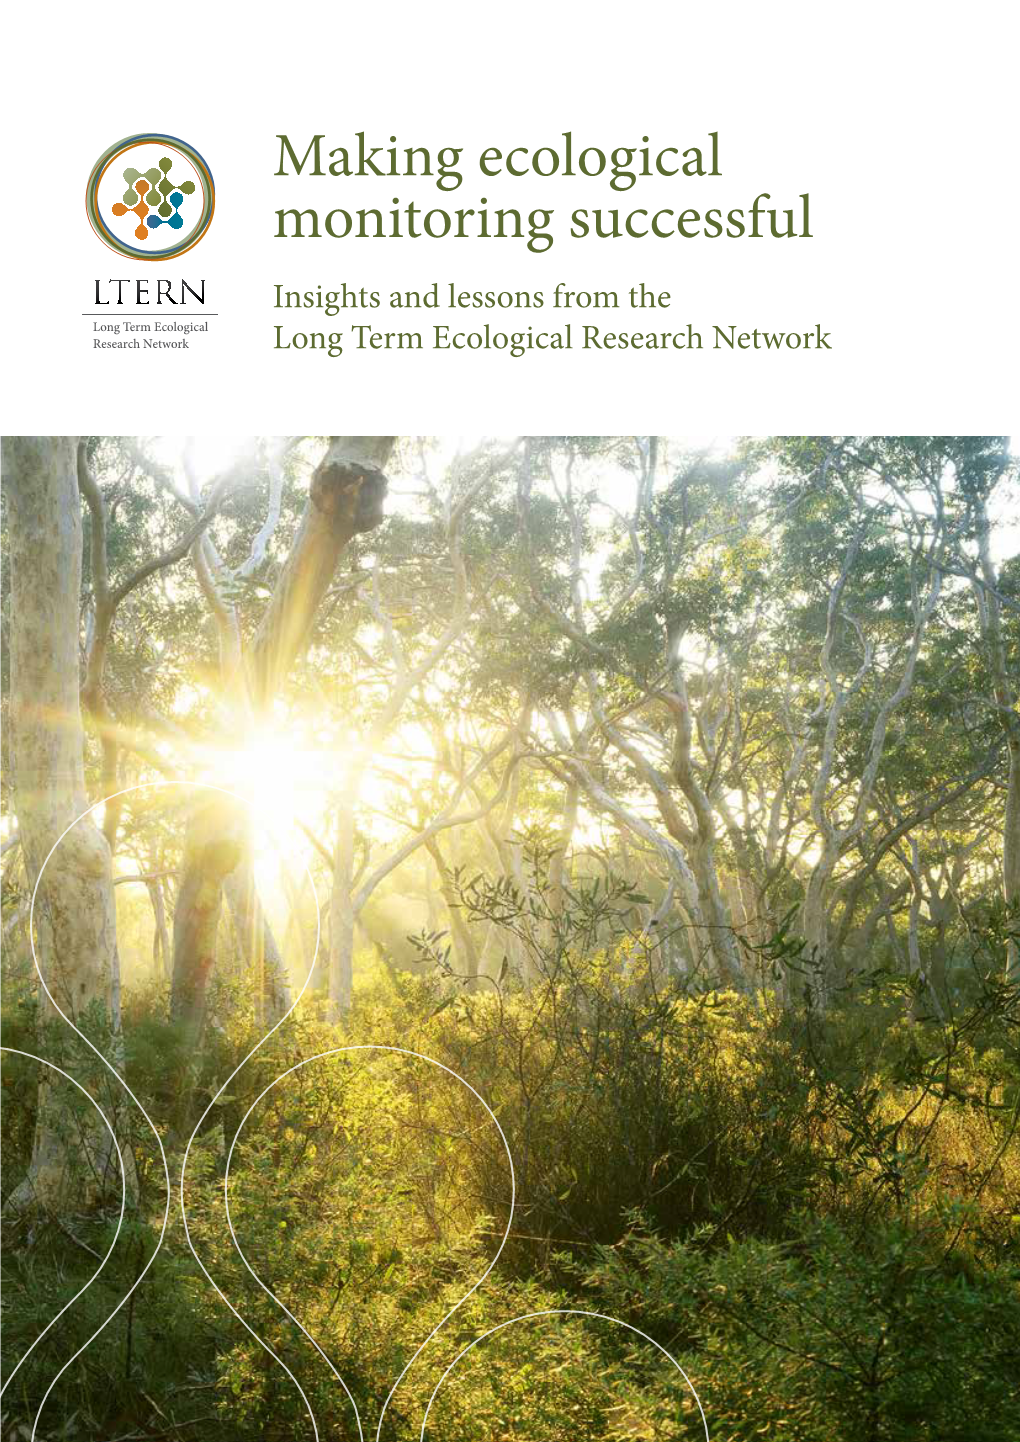 Making Ecological Monitoring Successful